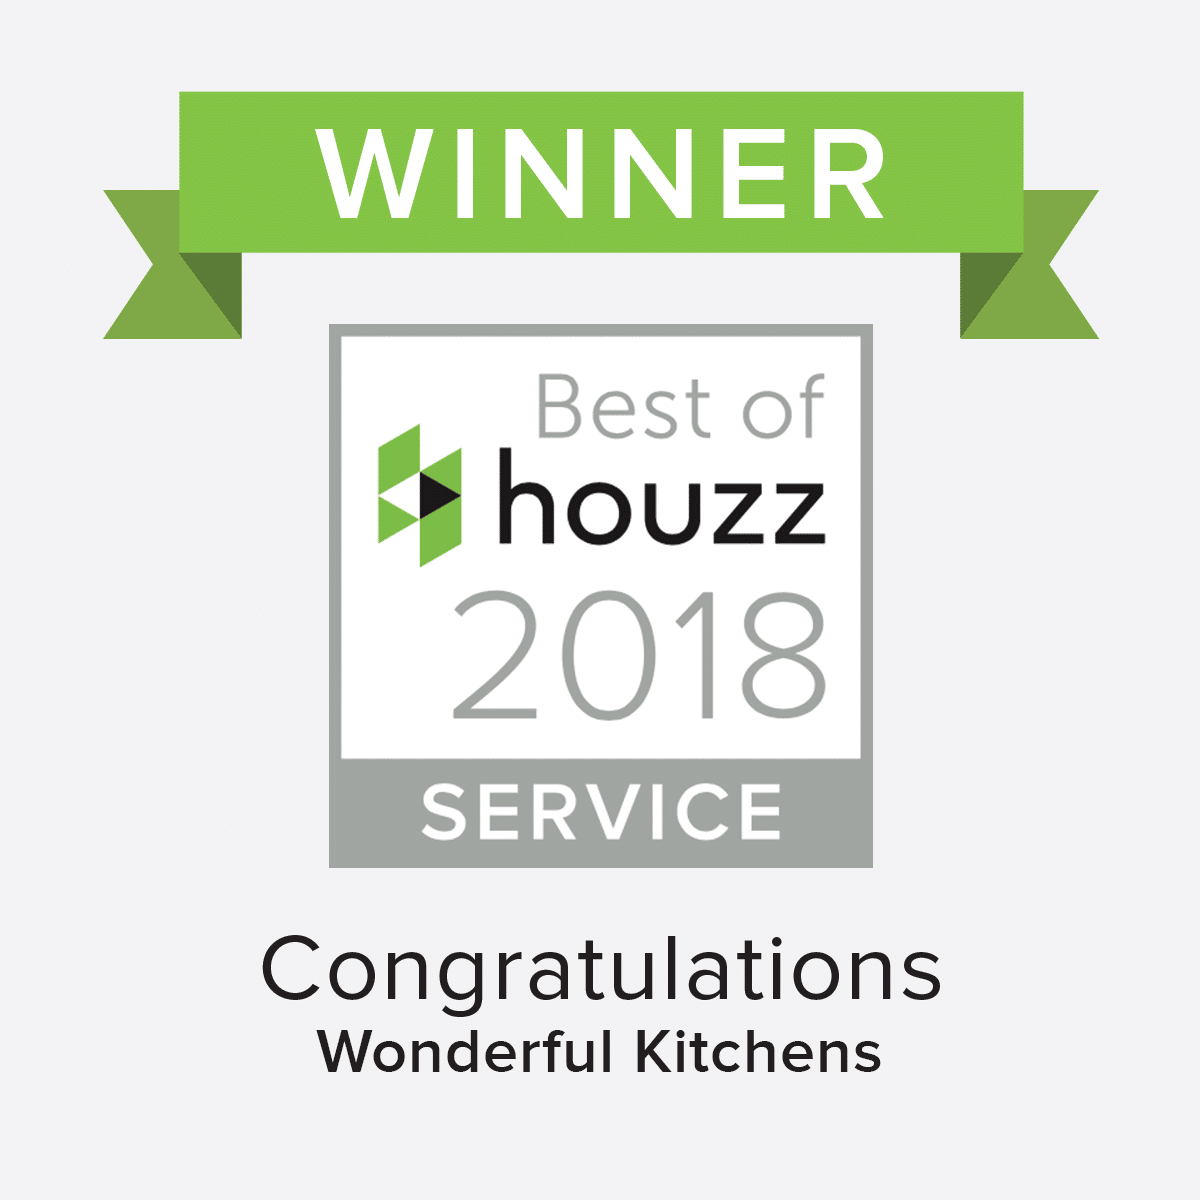 onderful Kitchens Winners of Best of Houzz 2018 Service